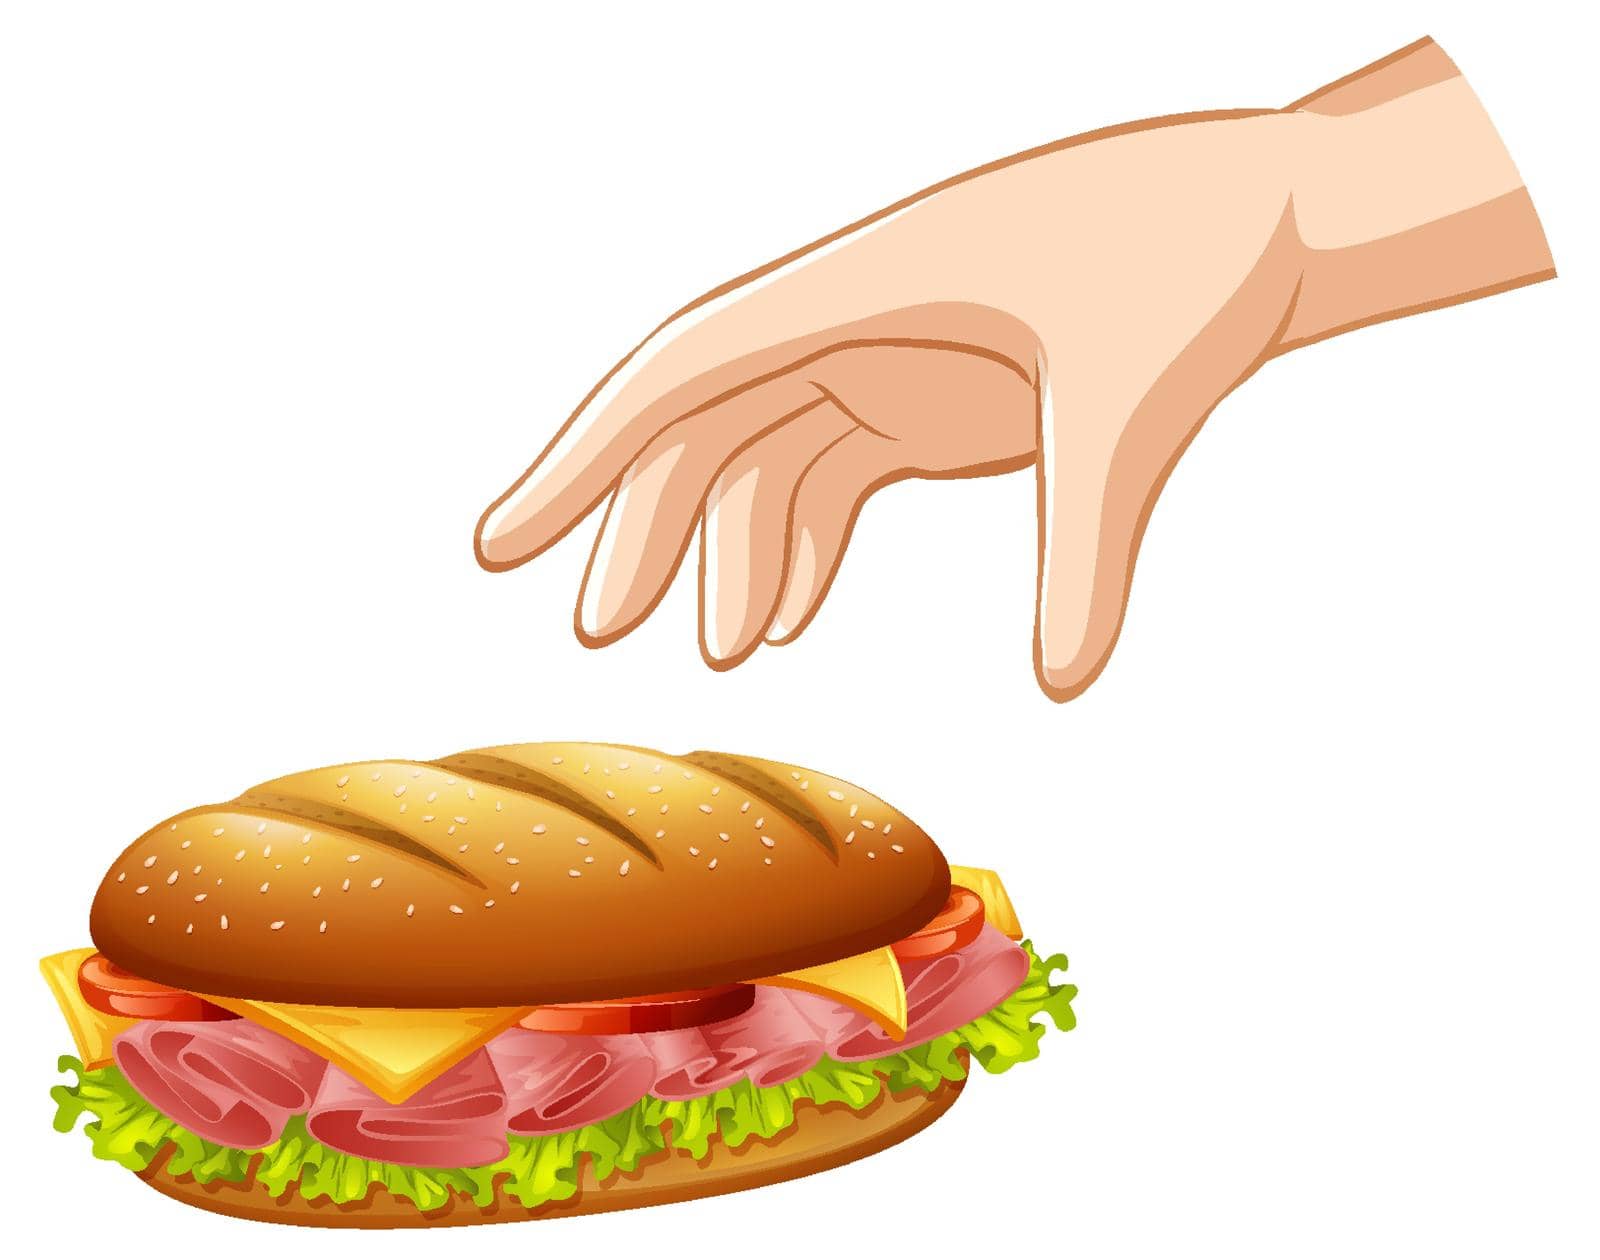 Hand dropping hamburger for gravity experiment by iimages